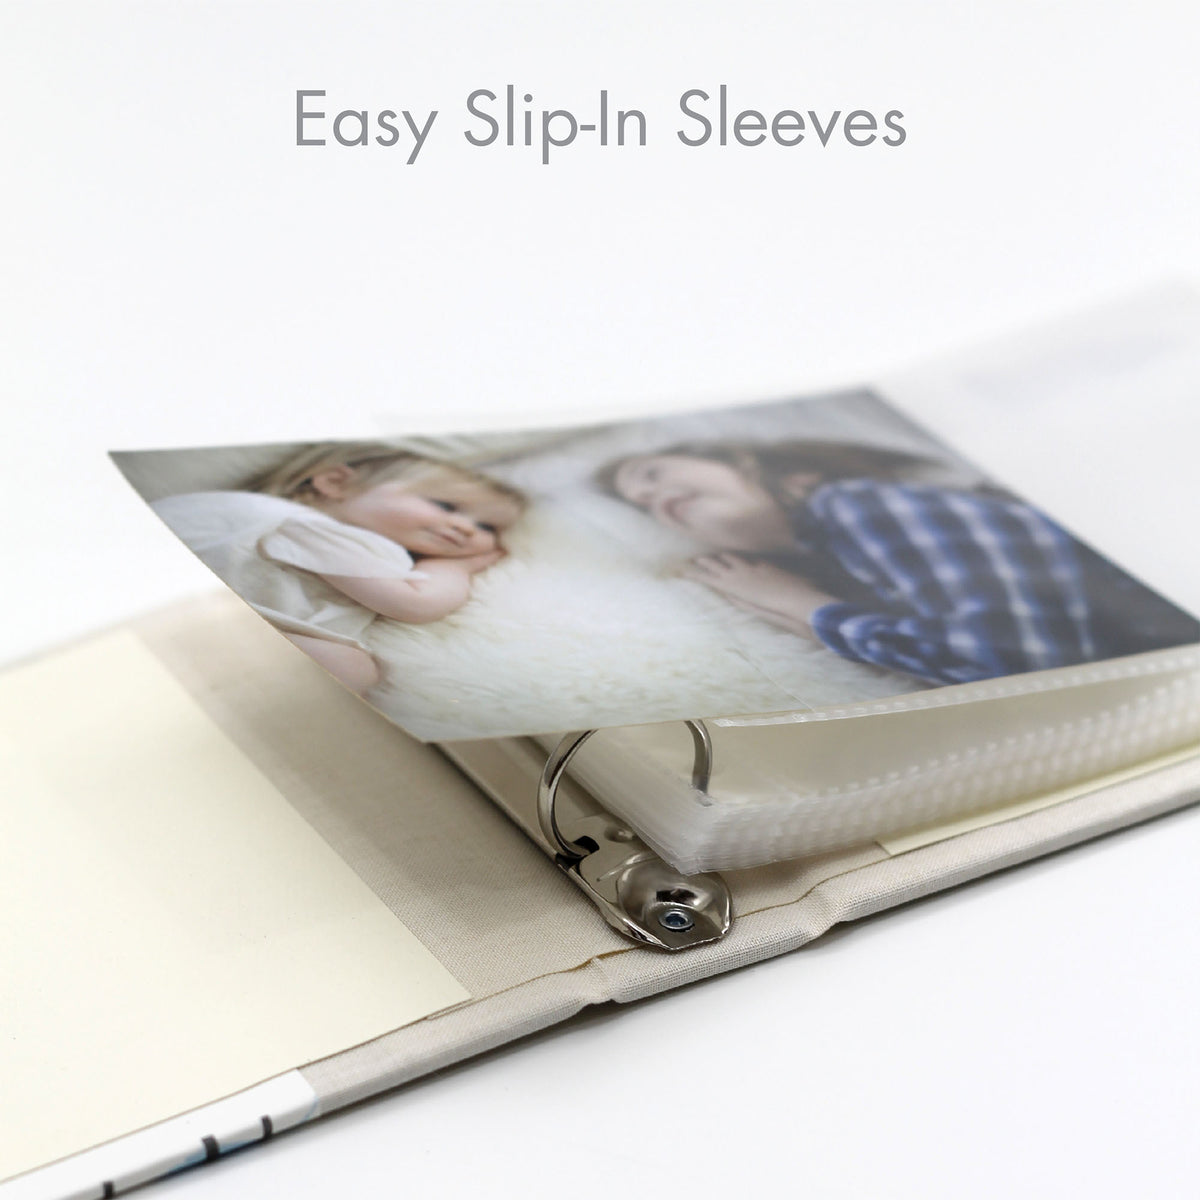 Small Photo Binder | Printed Cover: Hello Baby Gray | 4x6 Photos | Available Personalized